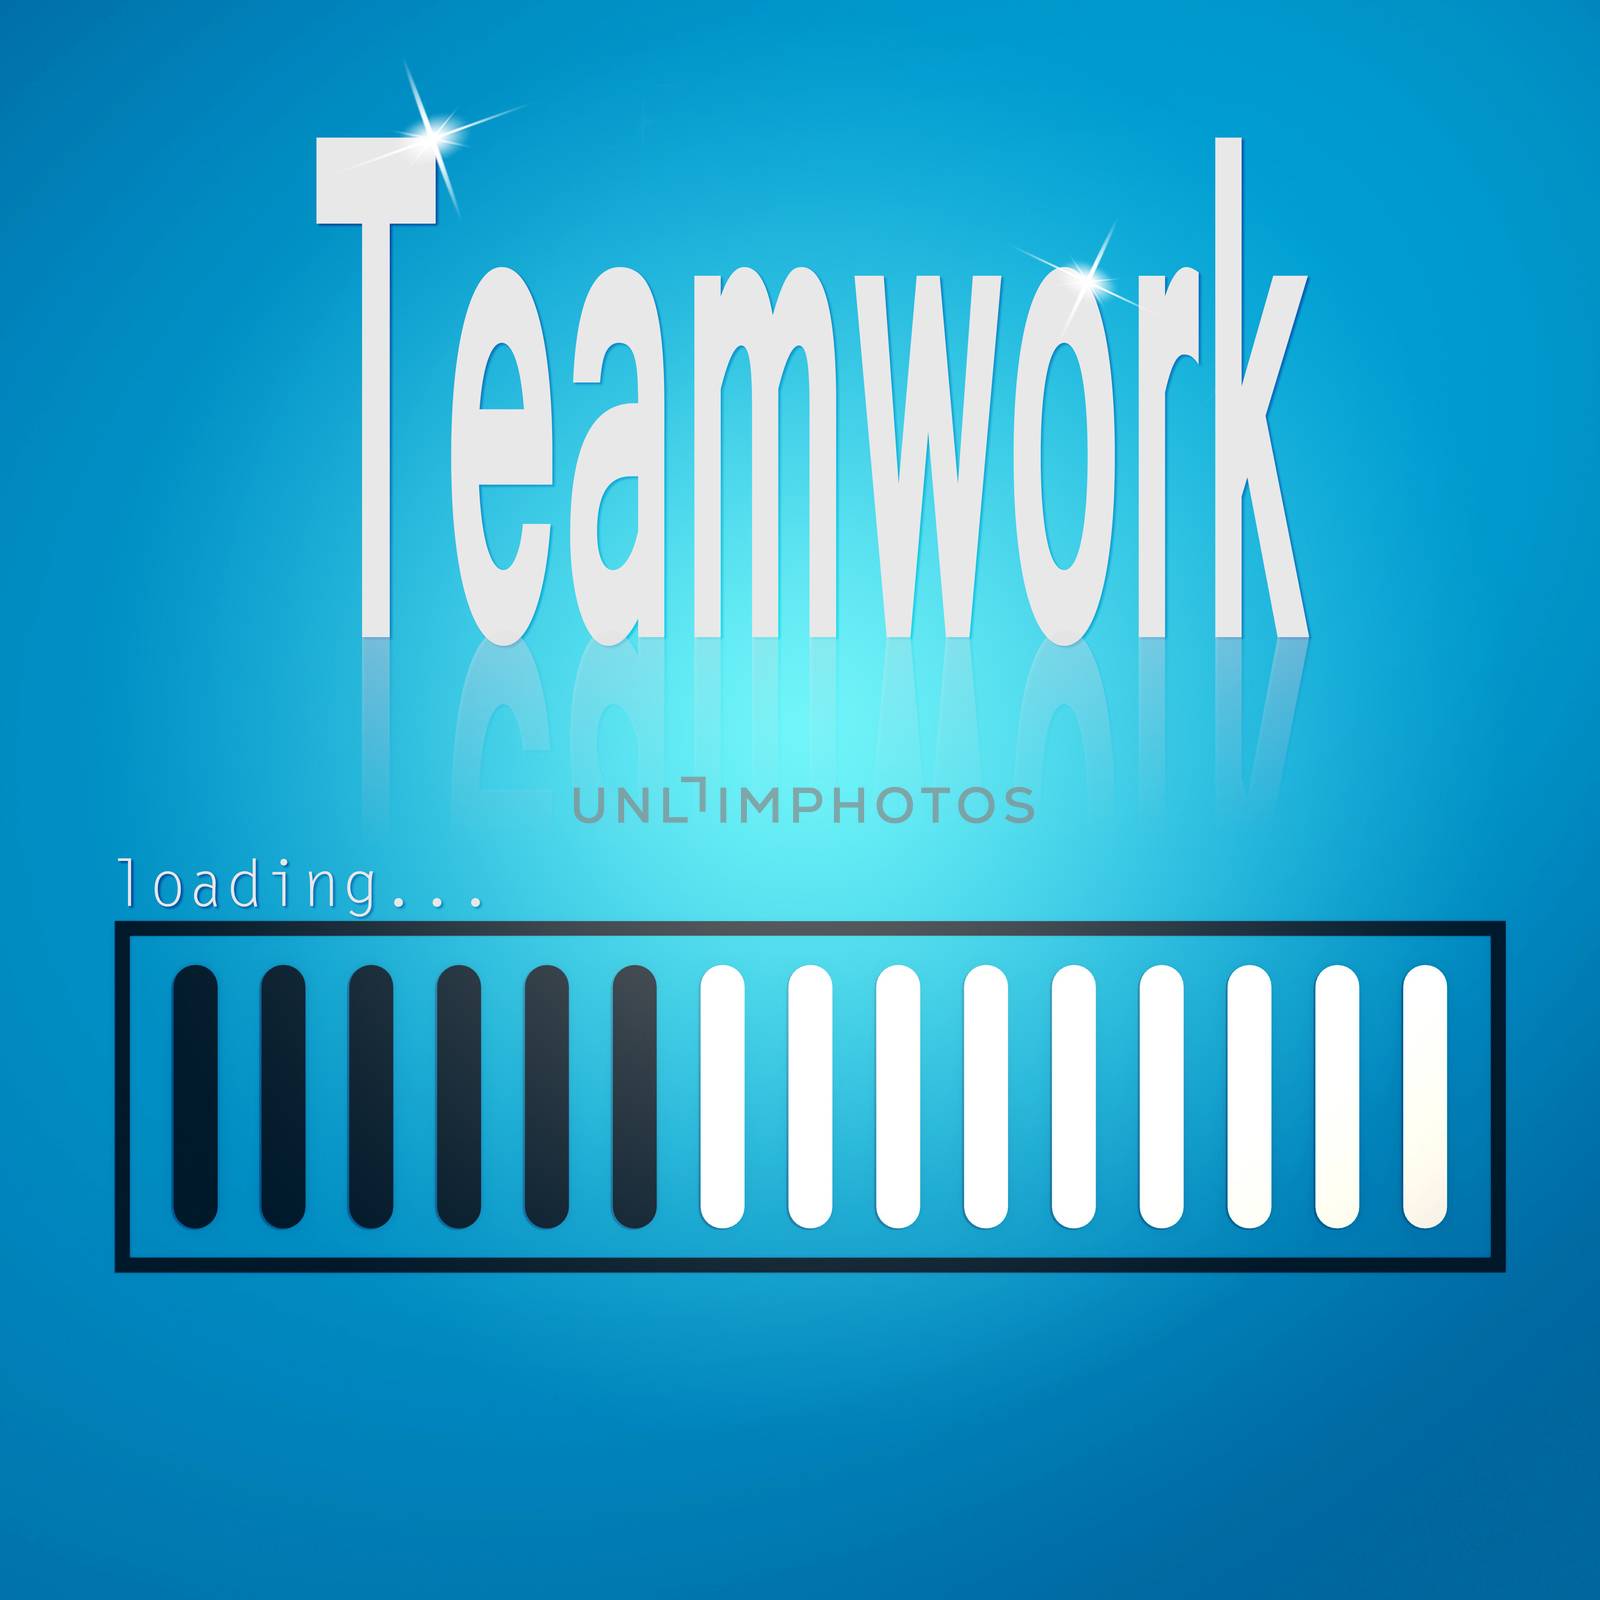 Teamwork blue loading bar image with hi-res rendered artwork that could be used for any graphic design.